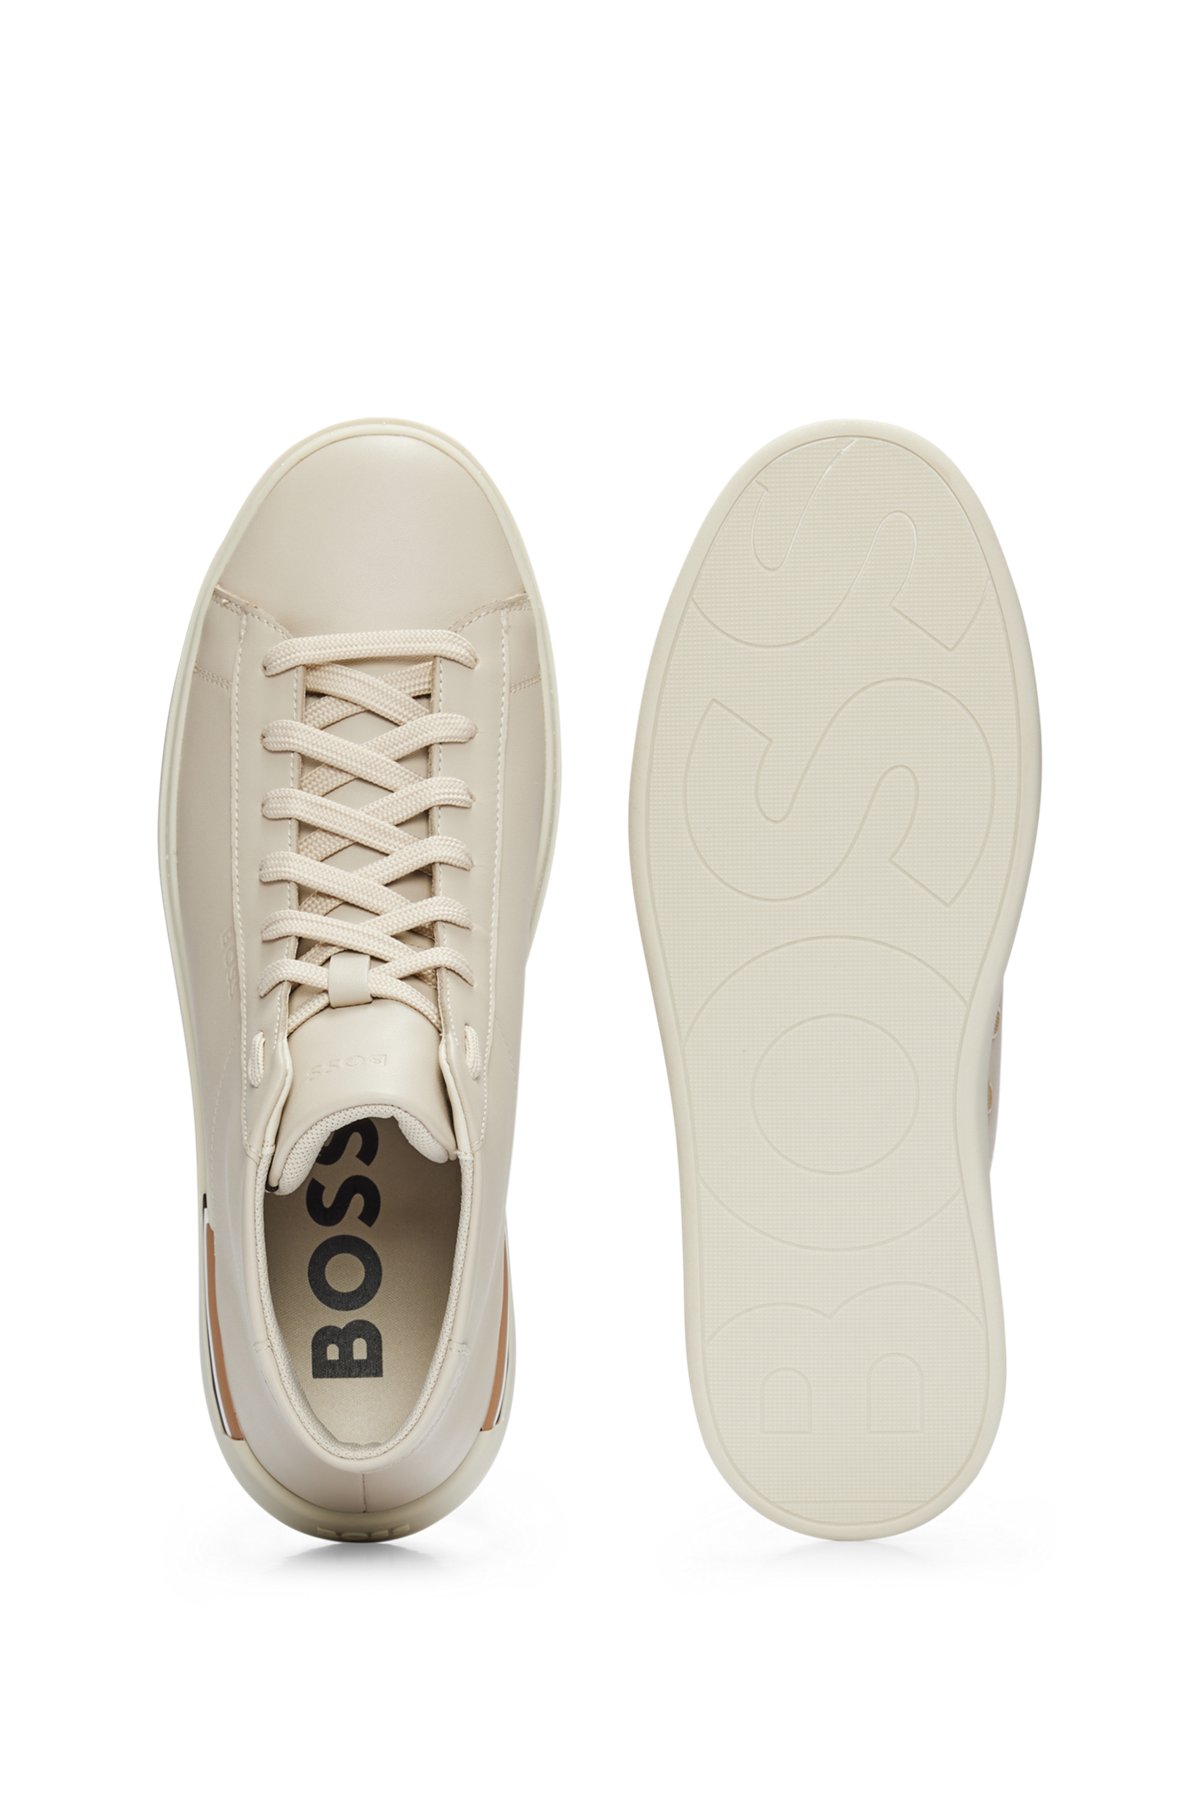 Leather trainers with signature stripes and logo, Light Beige